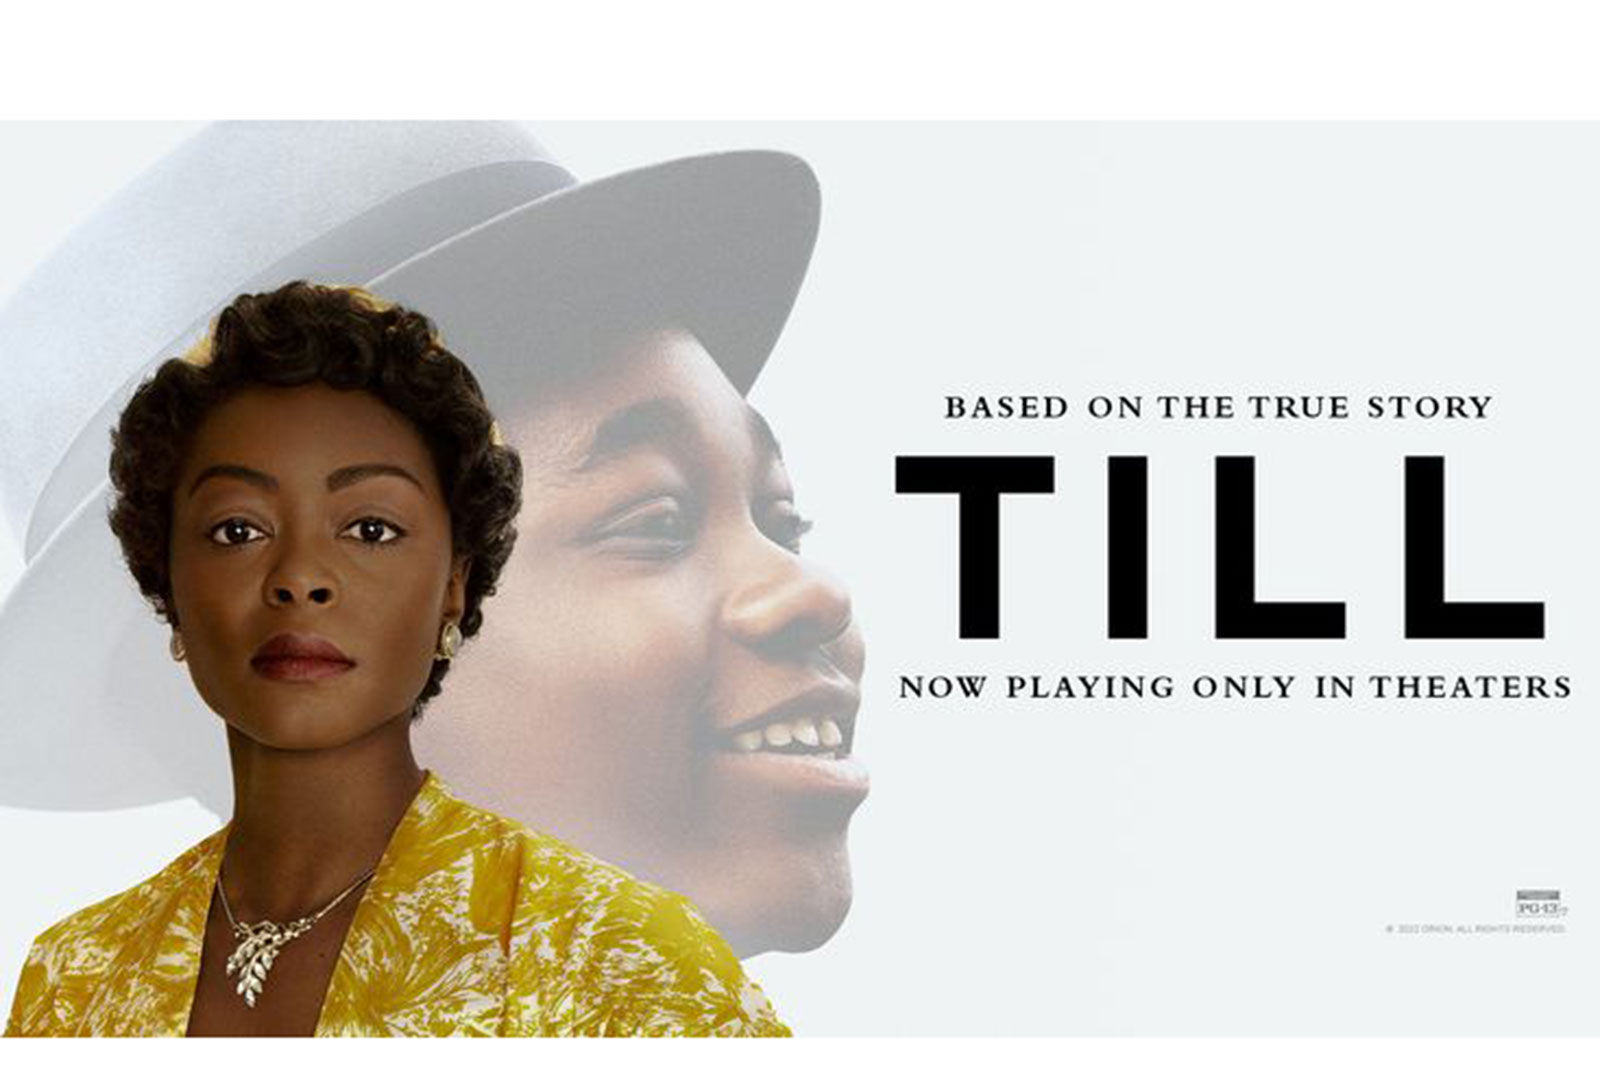 Till' is a powerful movie that 'should be considered essential